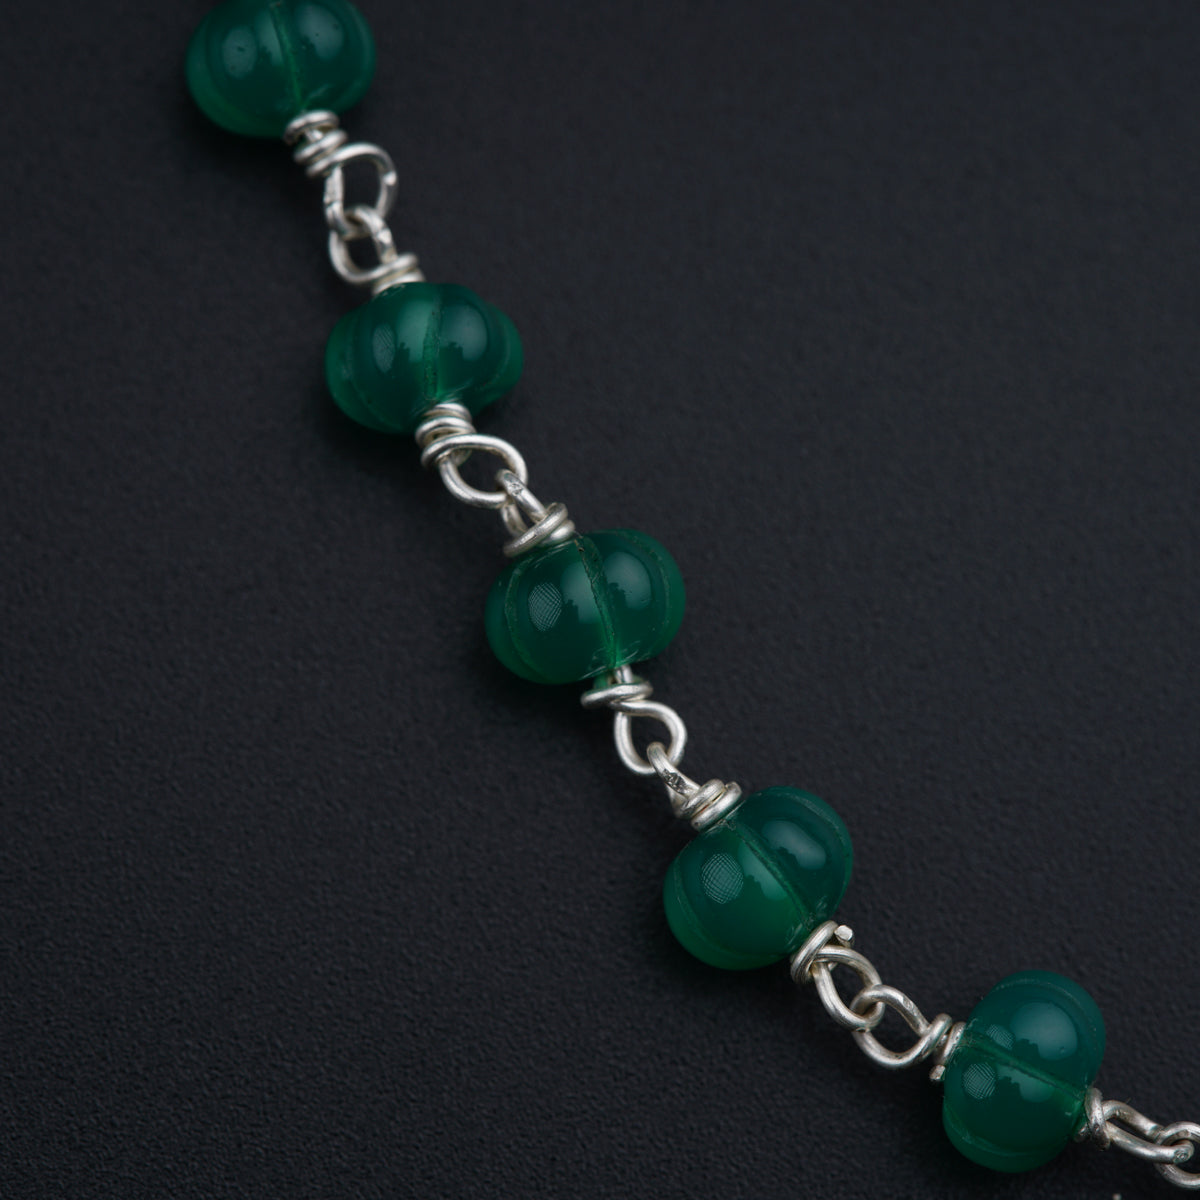 a close up of a bracelet with green beads